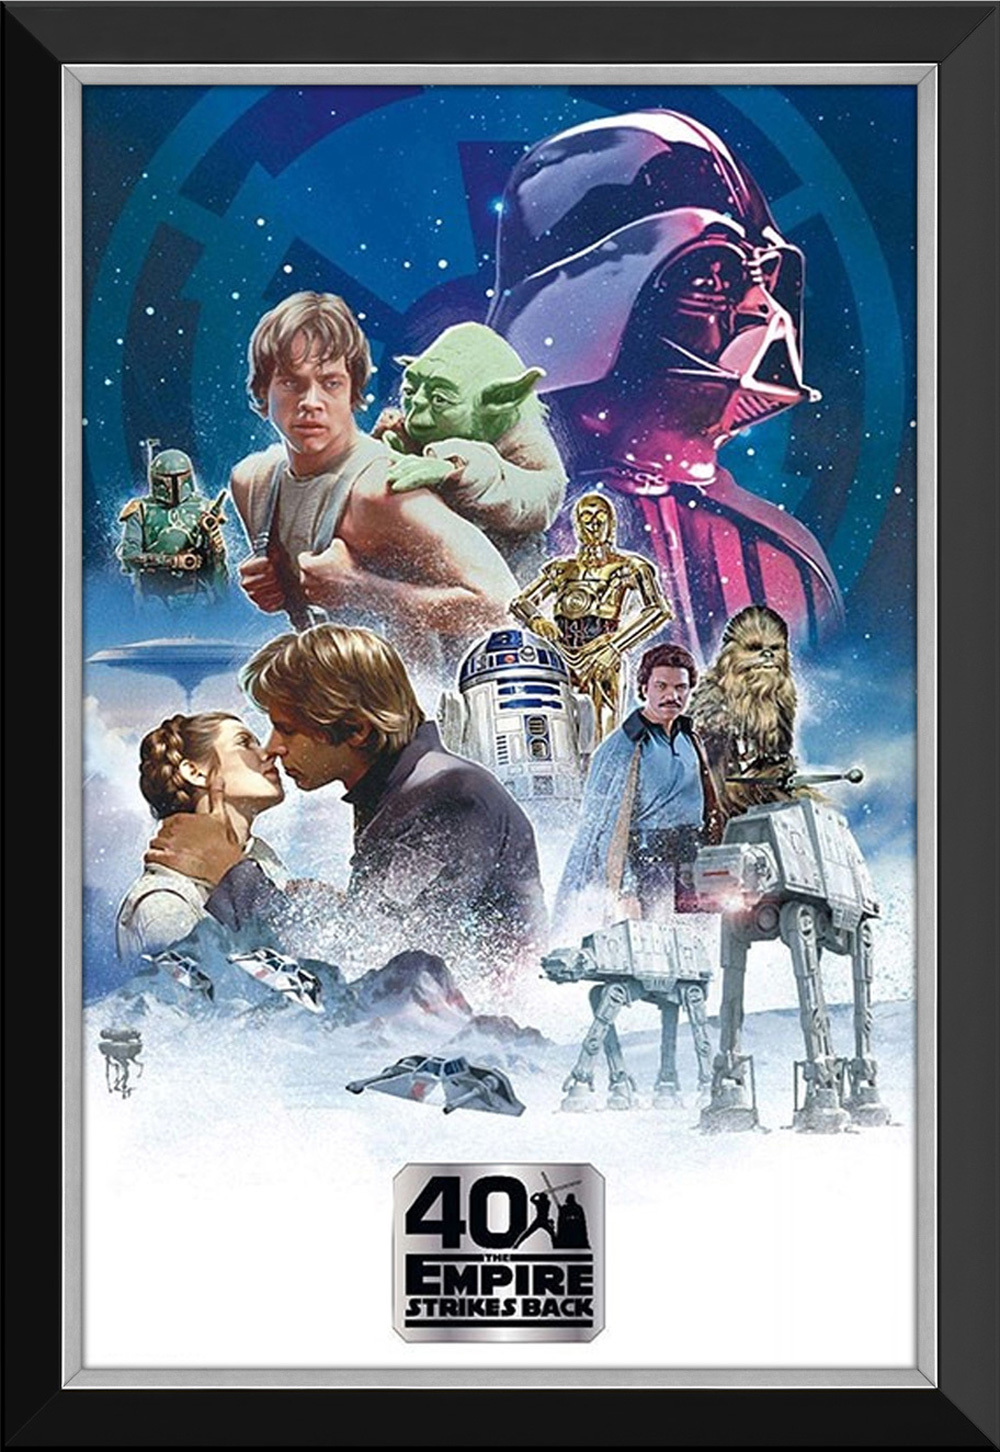 Star Wars Ep V Empire Strikes Back Th Anniversary Movie Poster Framed Canvas Art Posters